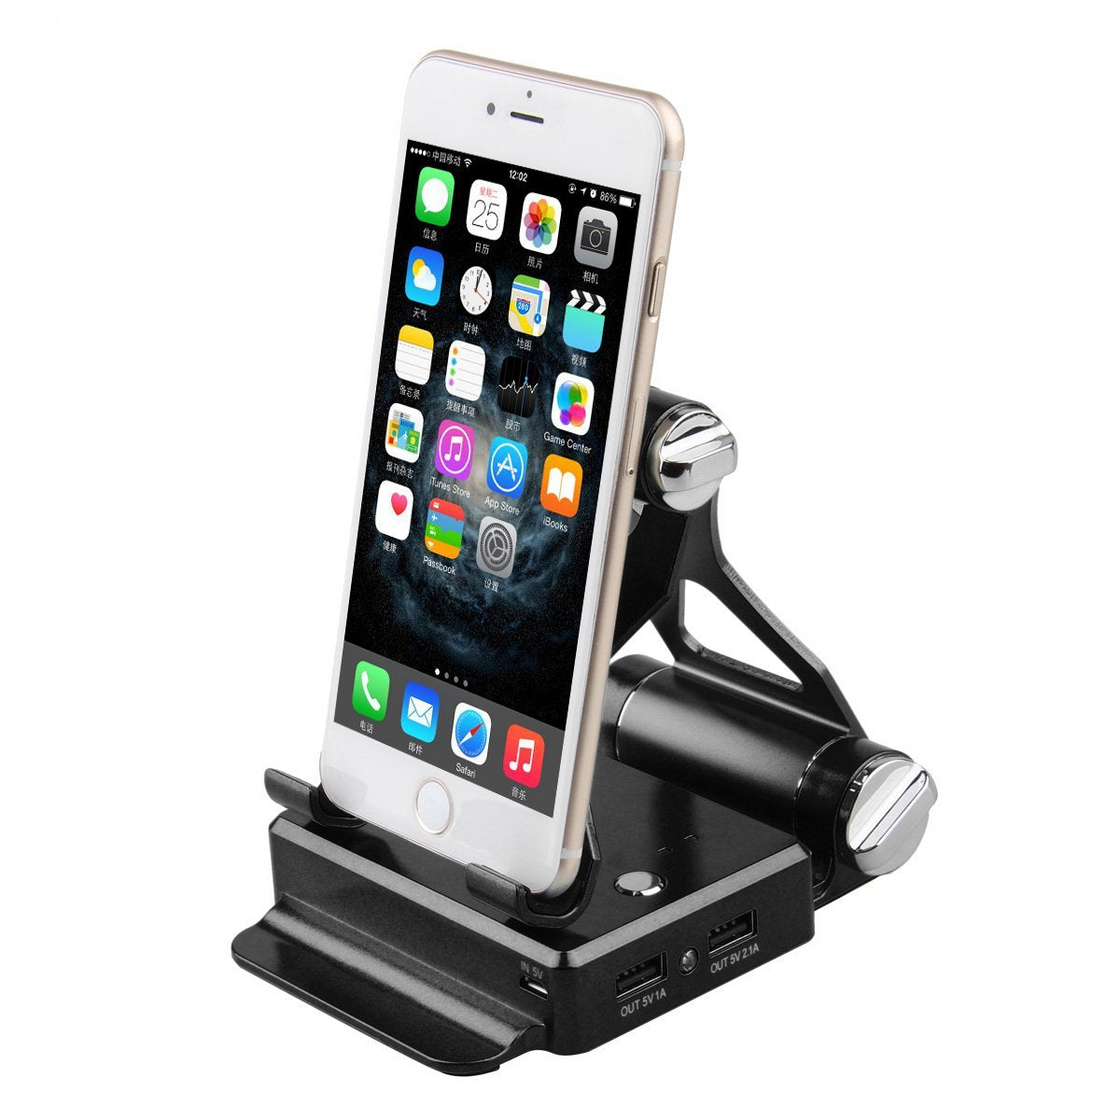 Podium Style Stand with Extended Battery for iPad, iPhone, and Smart Gadgets